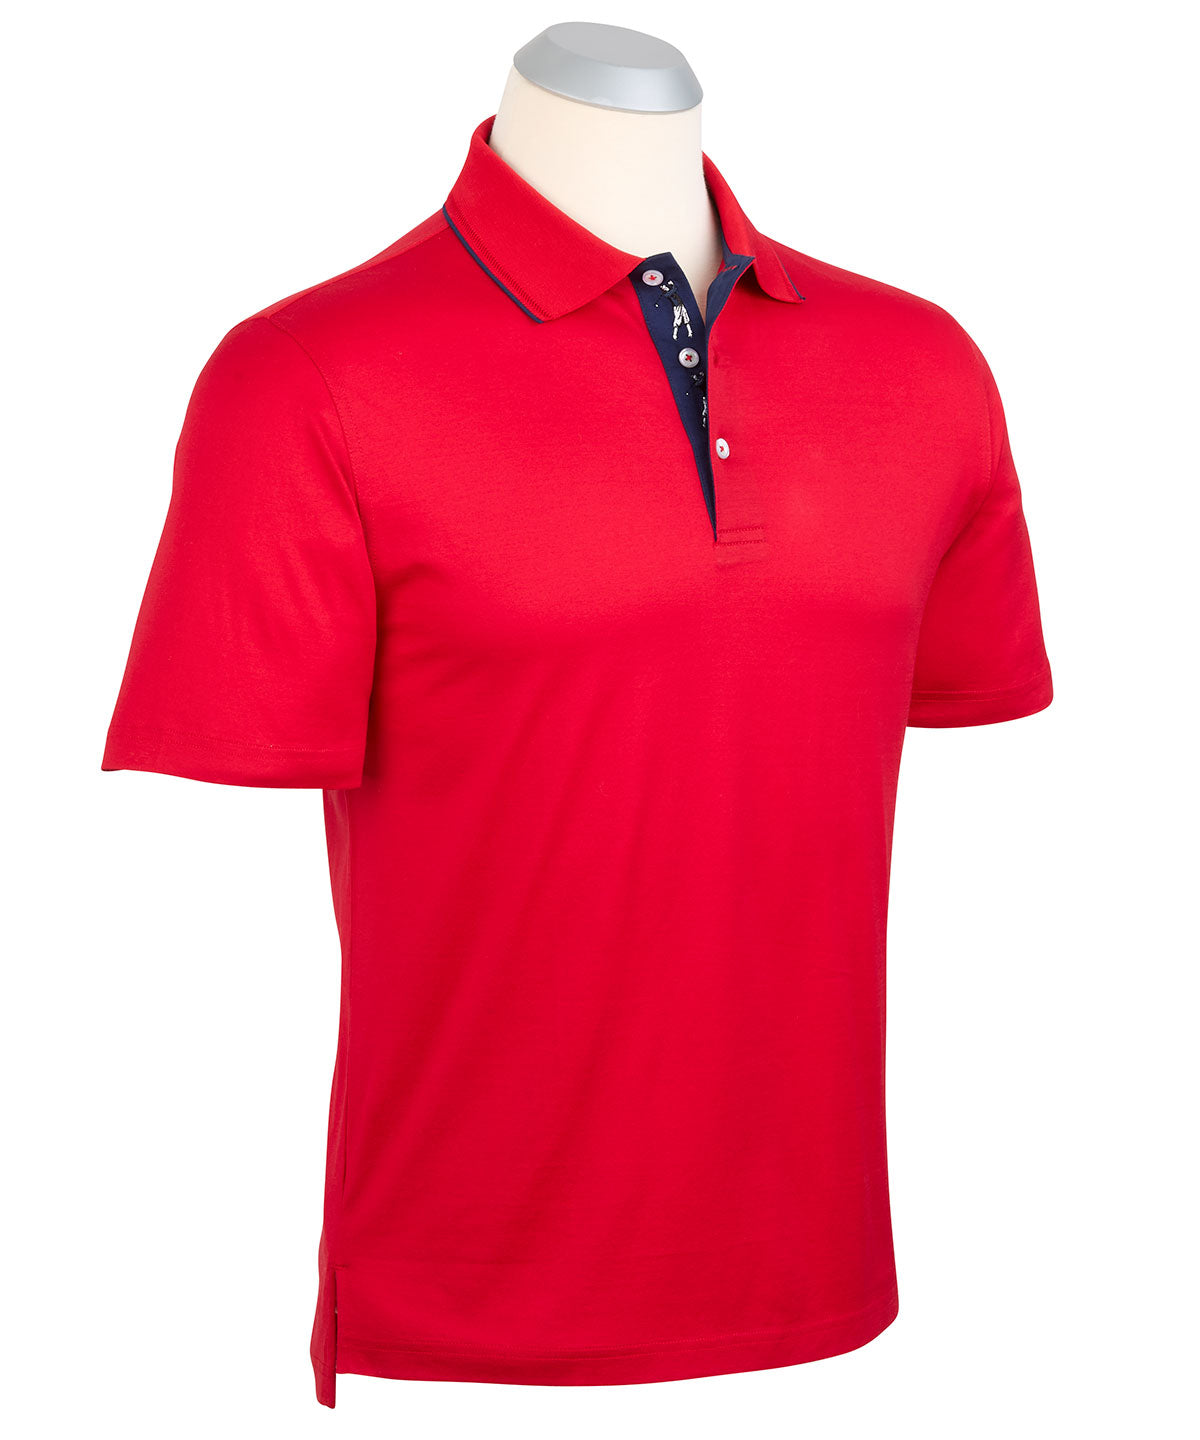 Red and White Mens Tipped Short Sleeve Polo Shirt - Red/White Small / Red and White